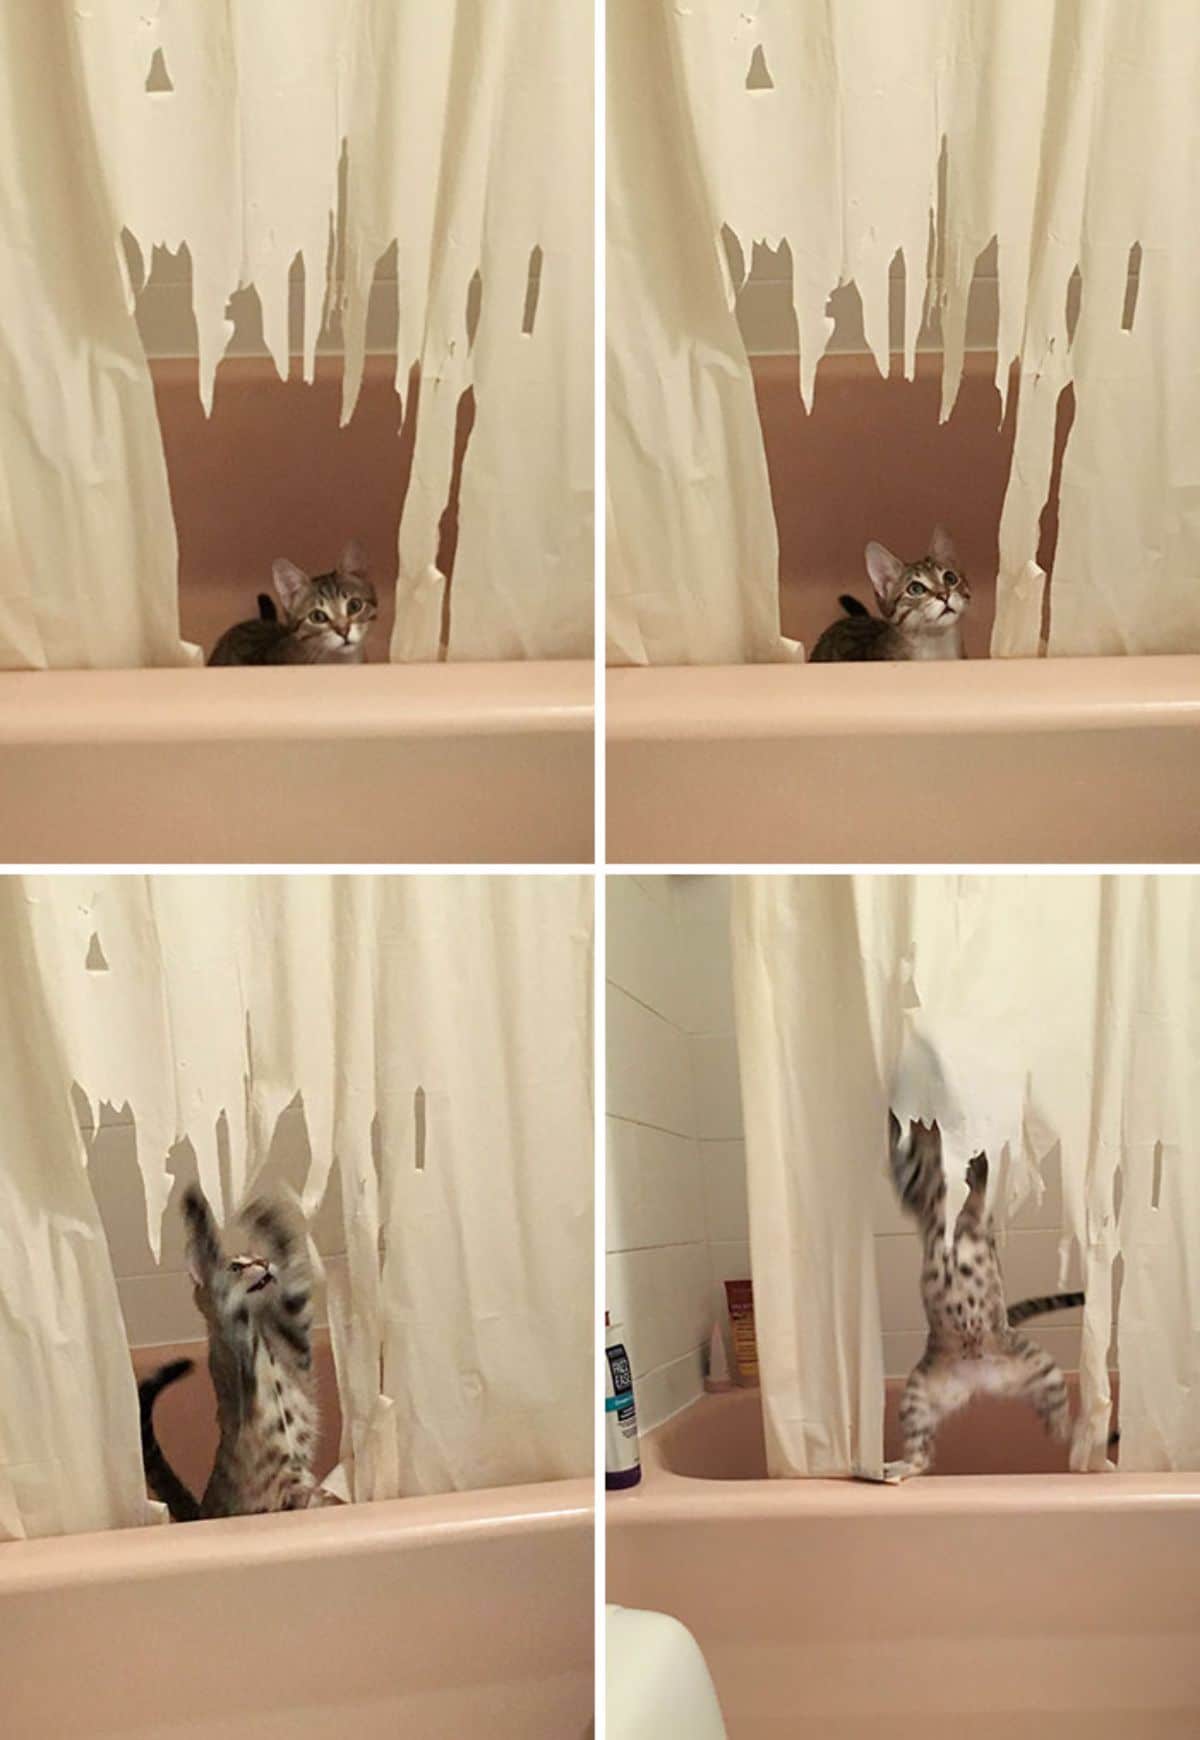 4 photos of a black grey and white cat sitting in a bathtub with a ripped up white shower curtain and then ripping up the curtain again